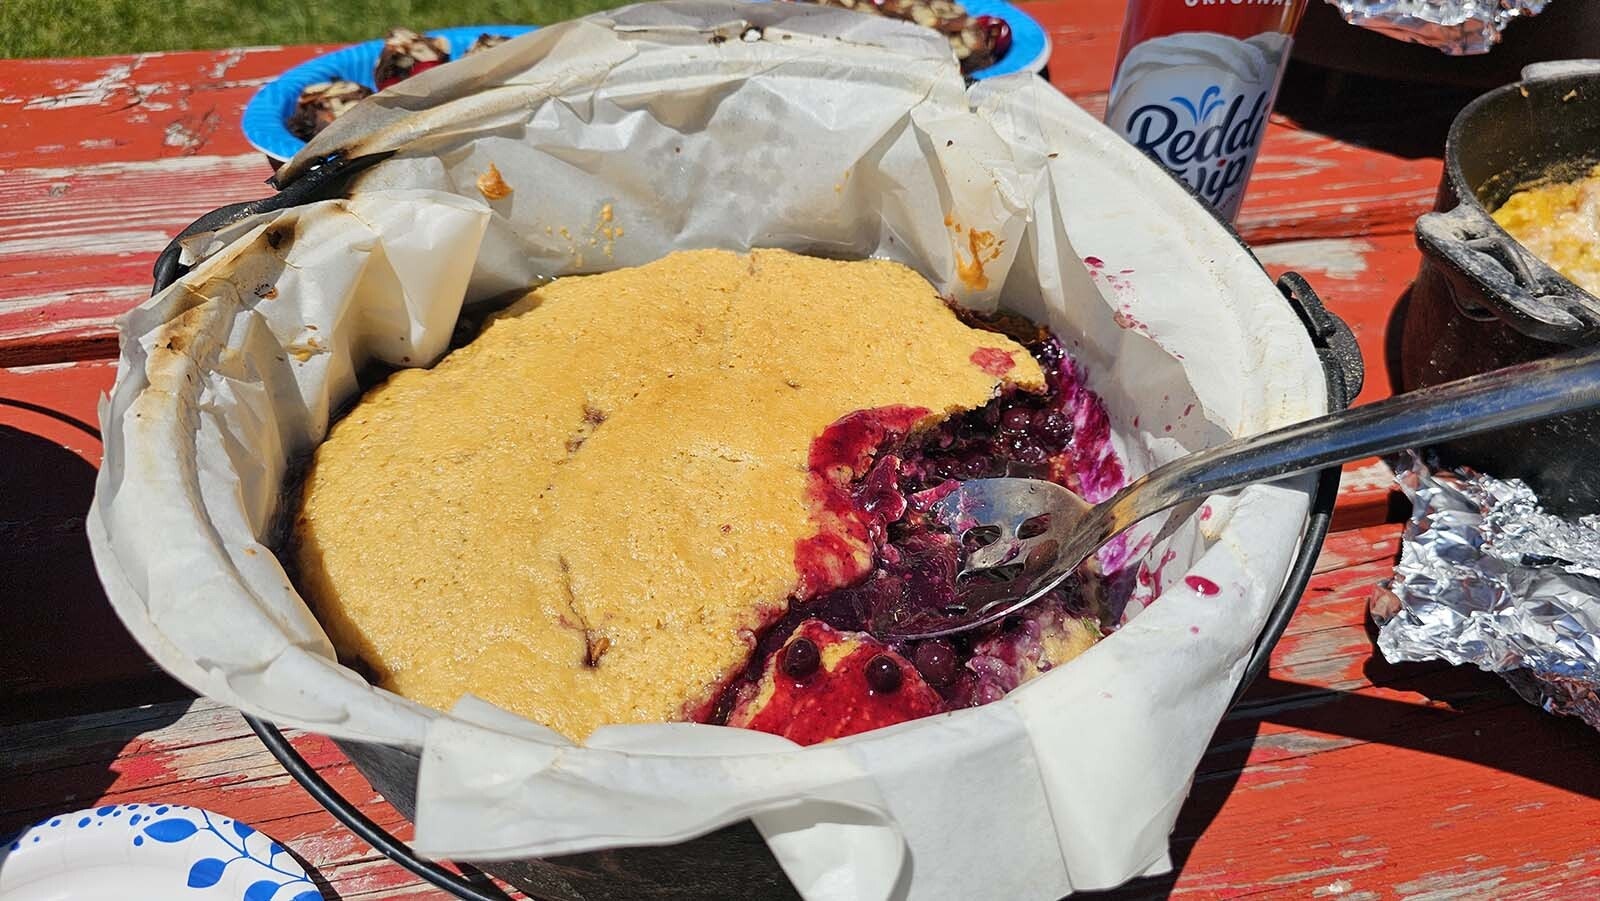 Dutch oven blueberry cobbler is among the desserts in the Esterbrook Church's potluck for Buckboard Sunday.